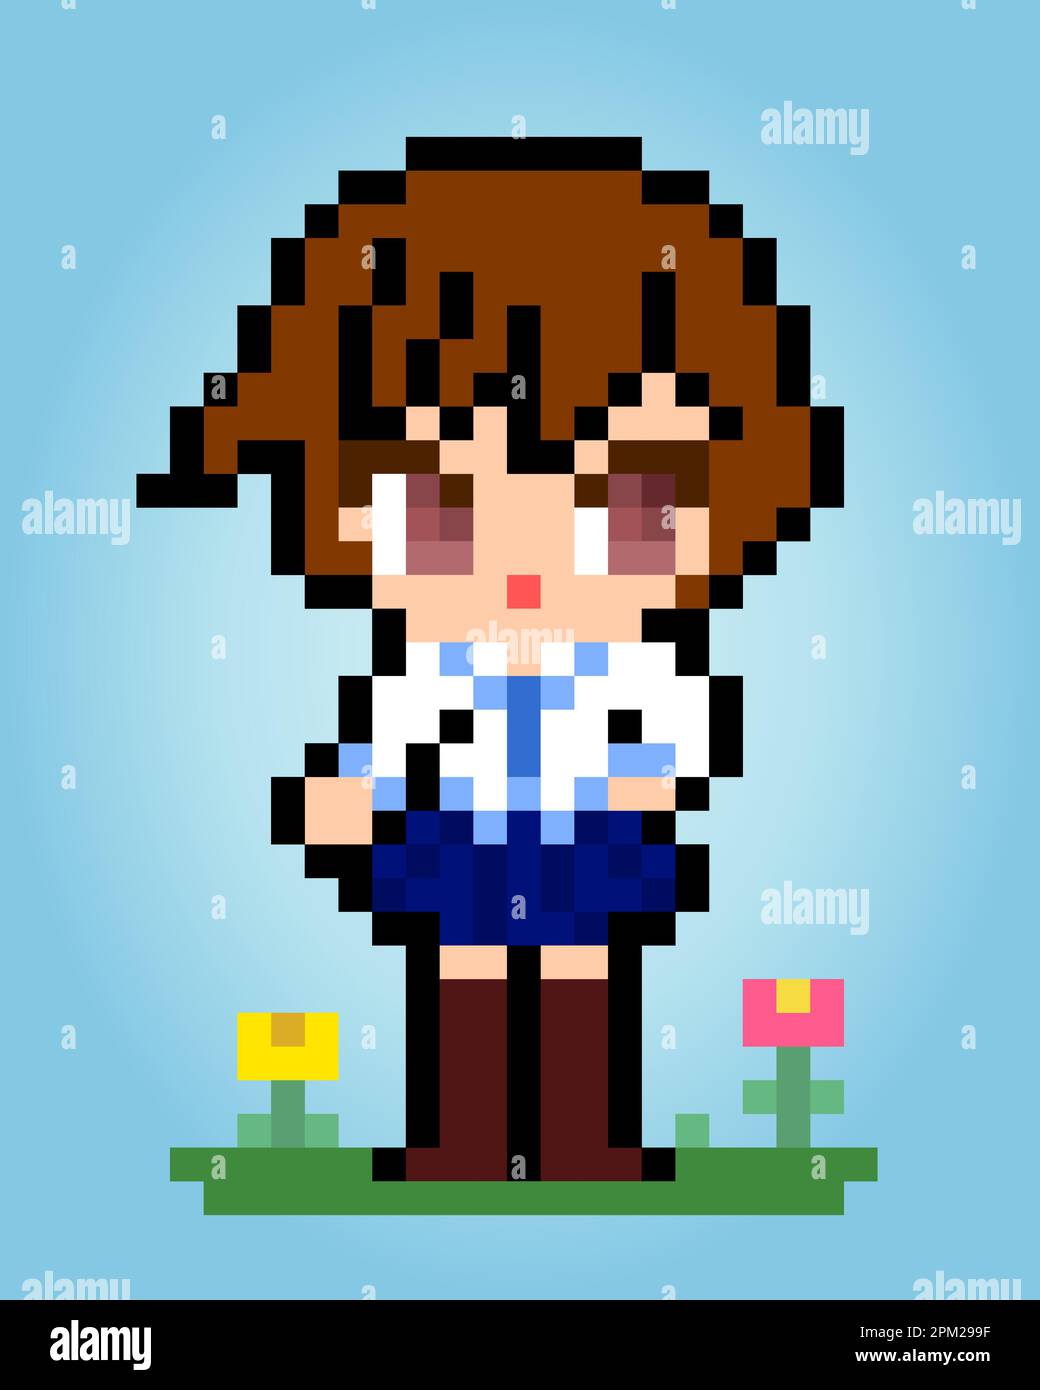 8 bit of pixel women's character. Pixel School girl in vector illustrations for game assets or cross stitch patterns. Stock Vector